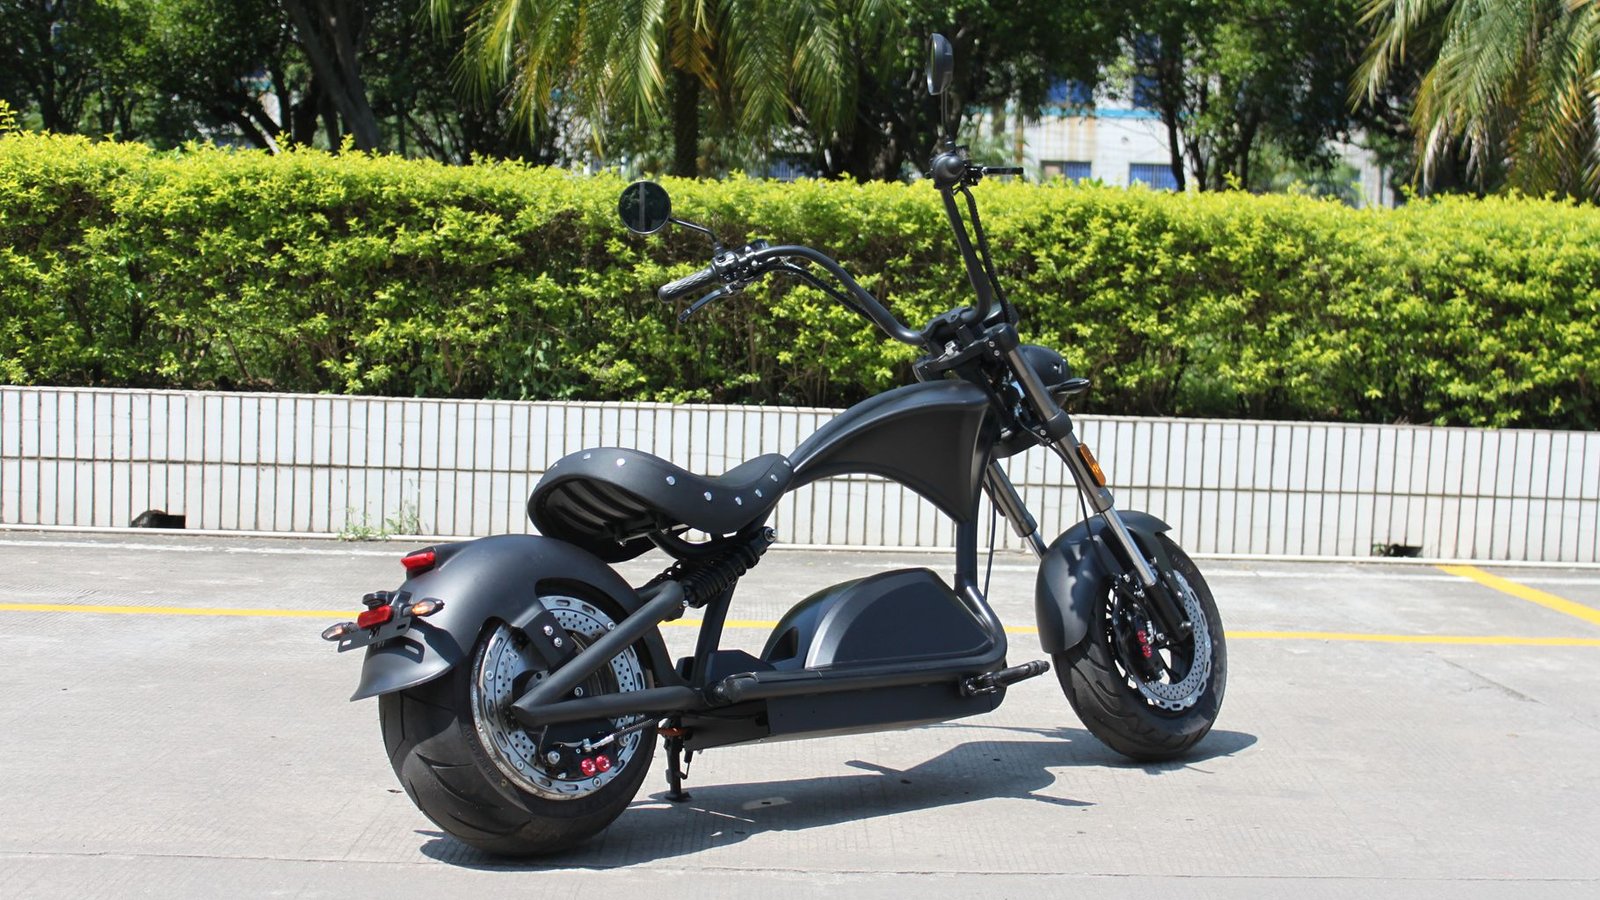 Rooder Mangosteen Sara M1ps 72v 4000w citycoco chopper electric motorcycle scooter (12)